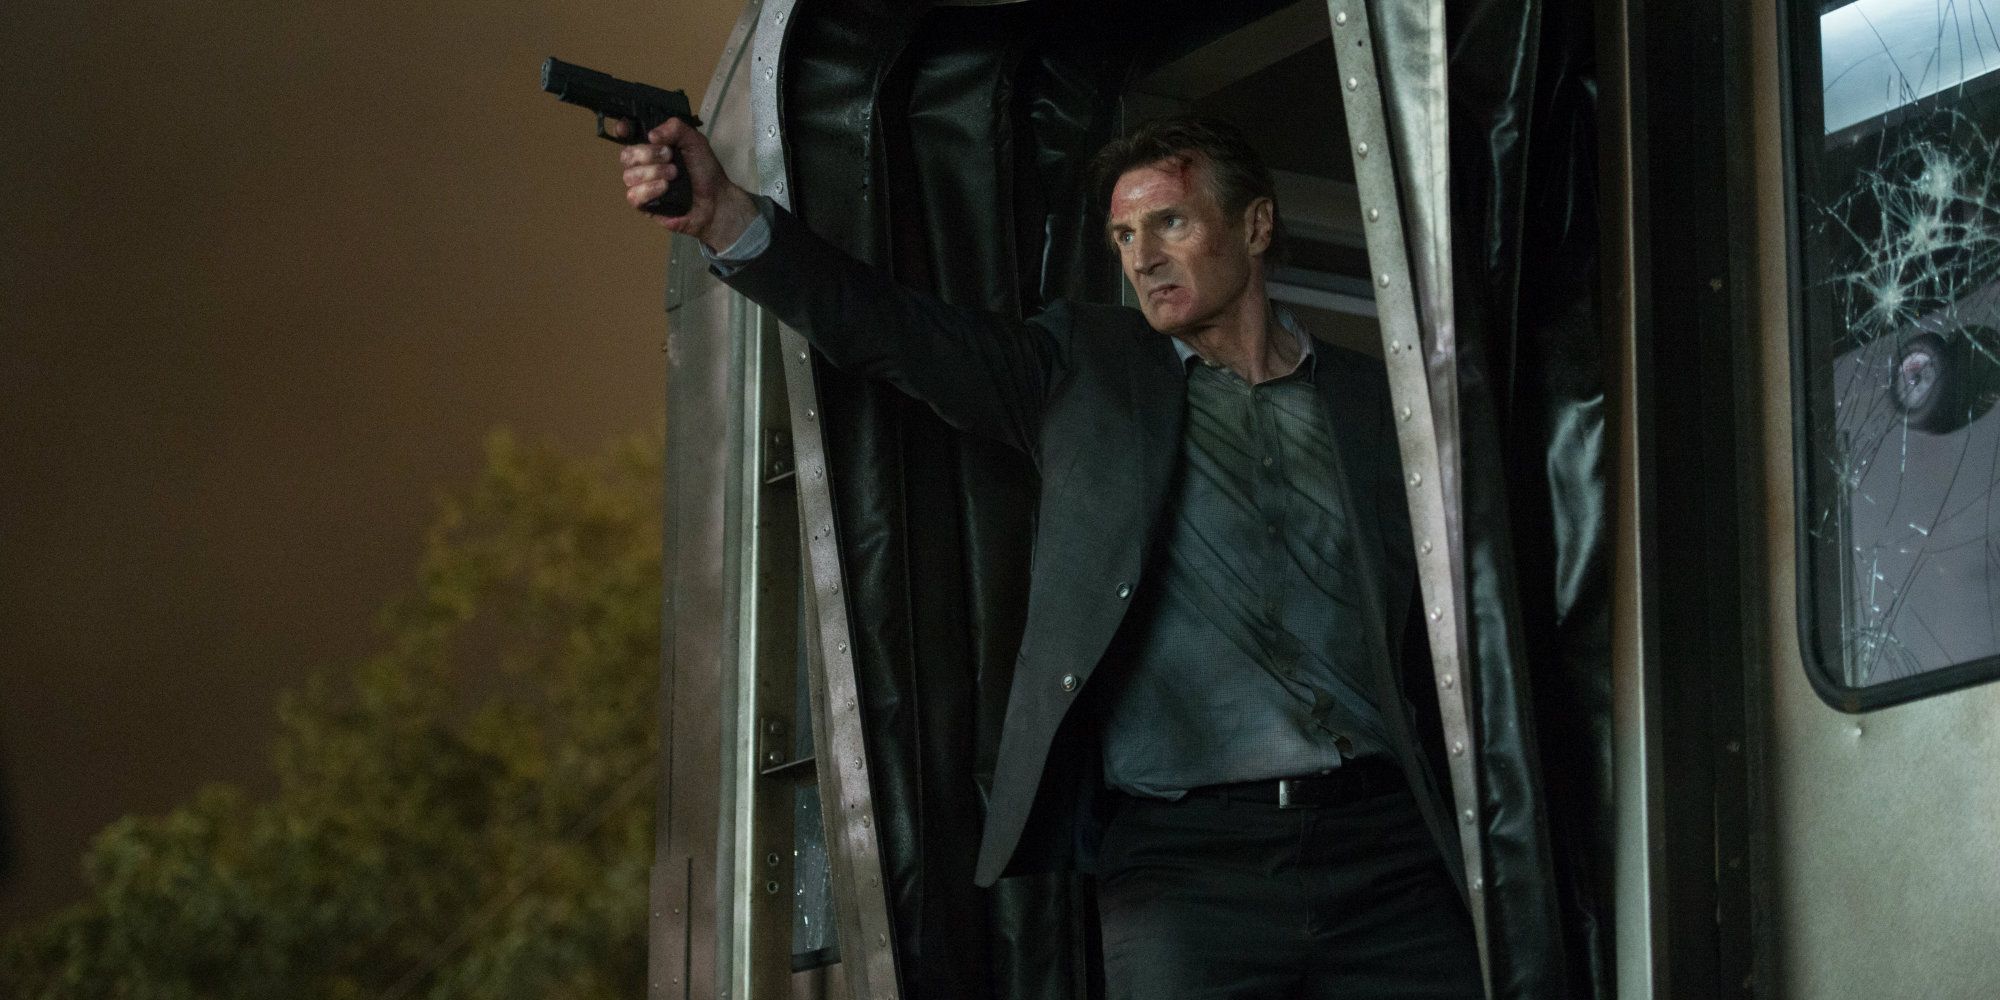 Liam Neeson pointing a gun in The Commuter